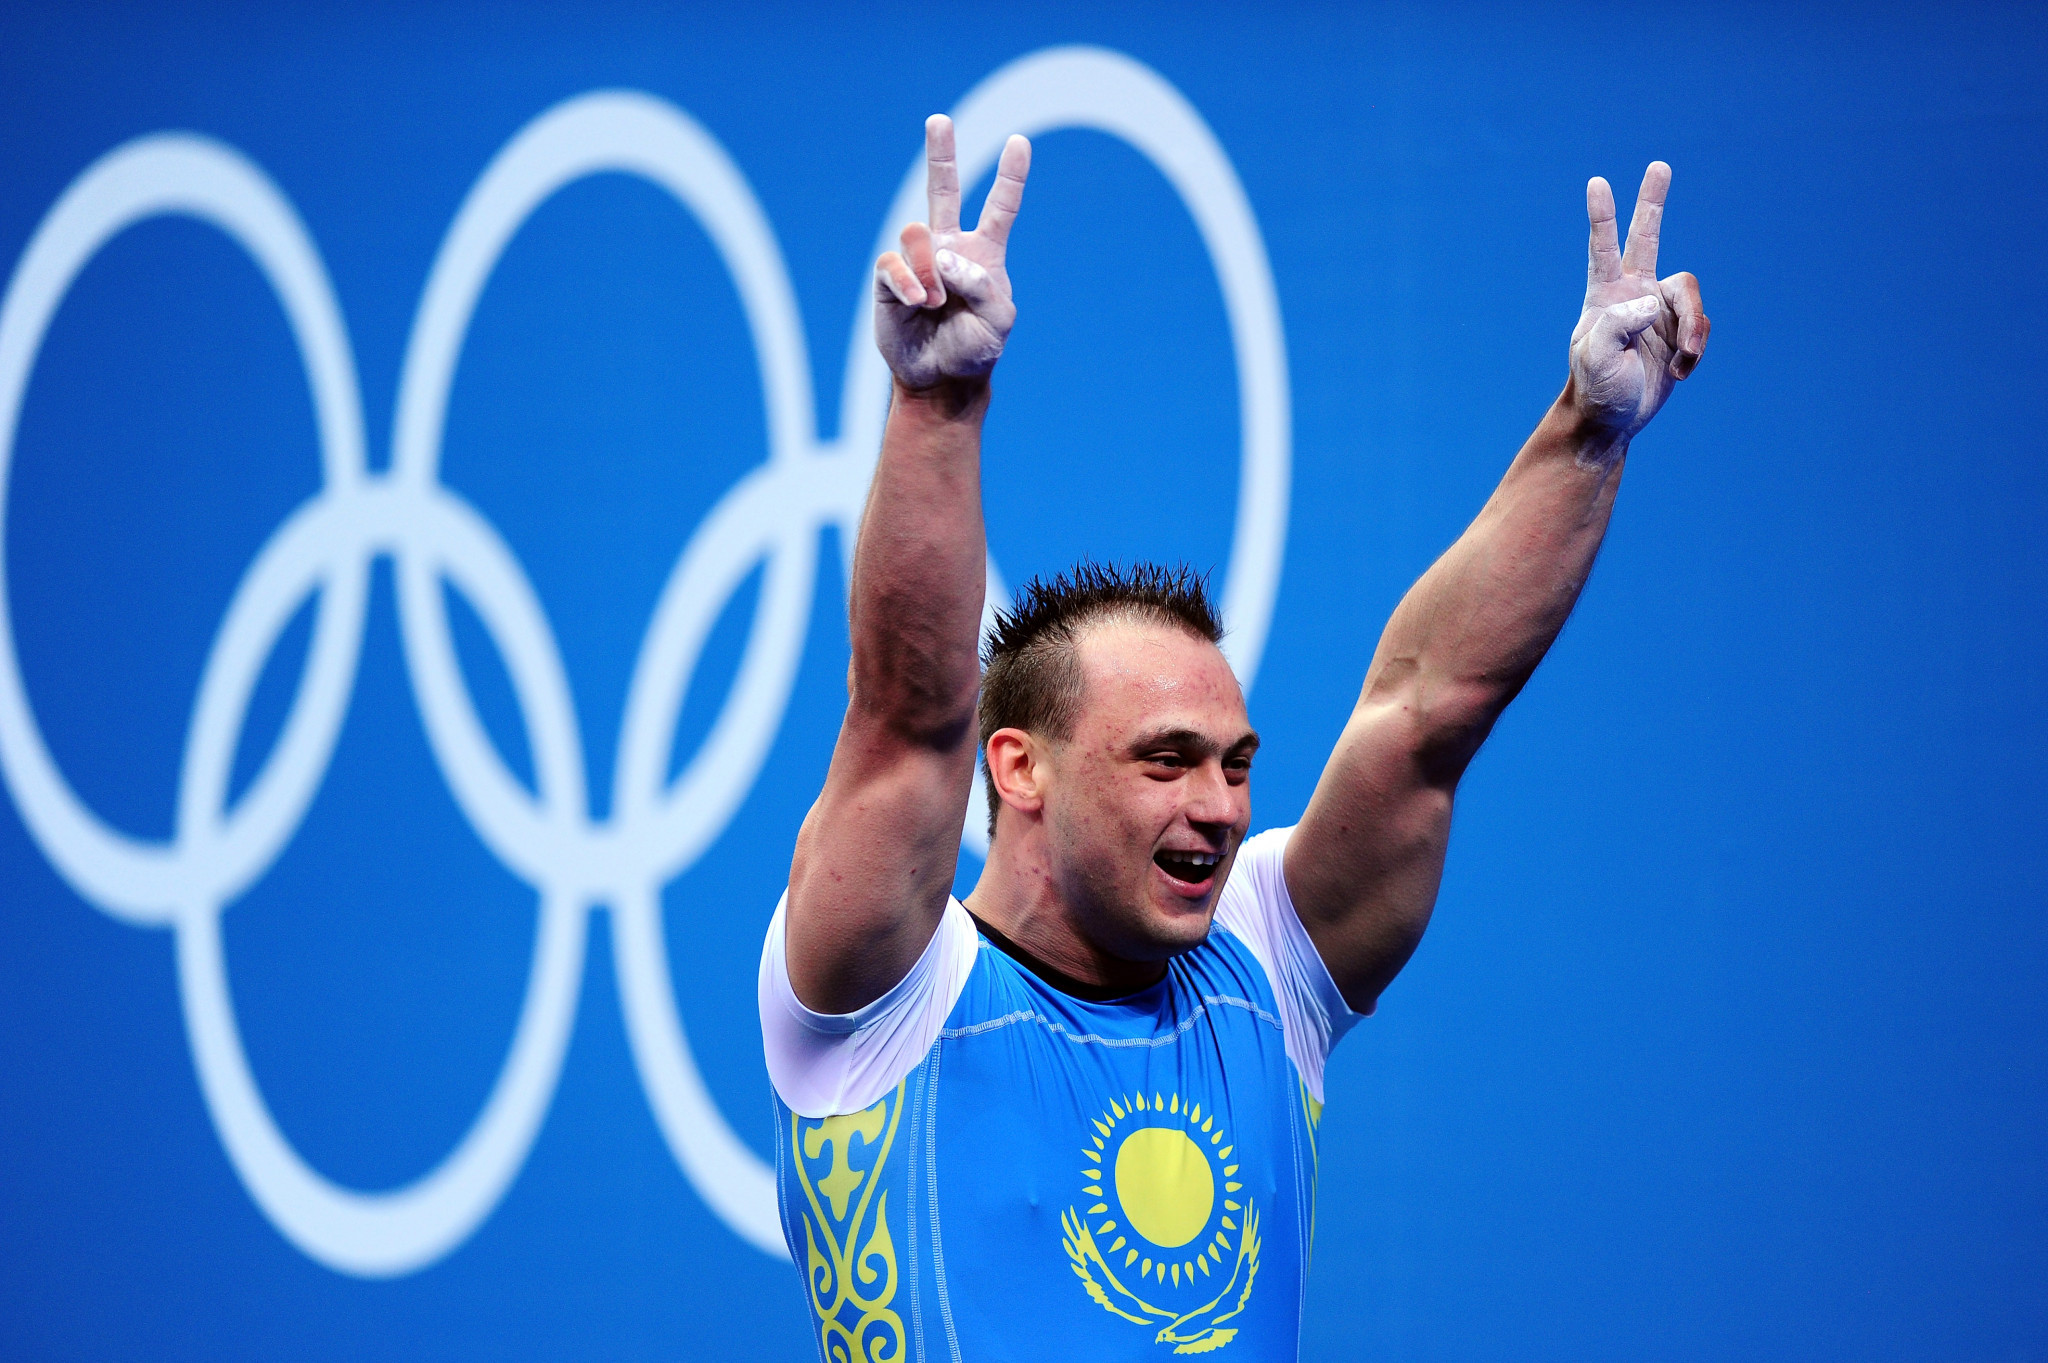 Kazakhstan’s Ilya Ilyin has been forced to withdraw from the 2018 International Weightlifting Federation World Championships ©Getty Images